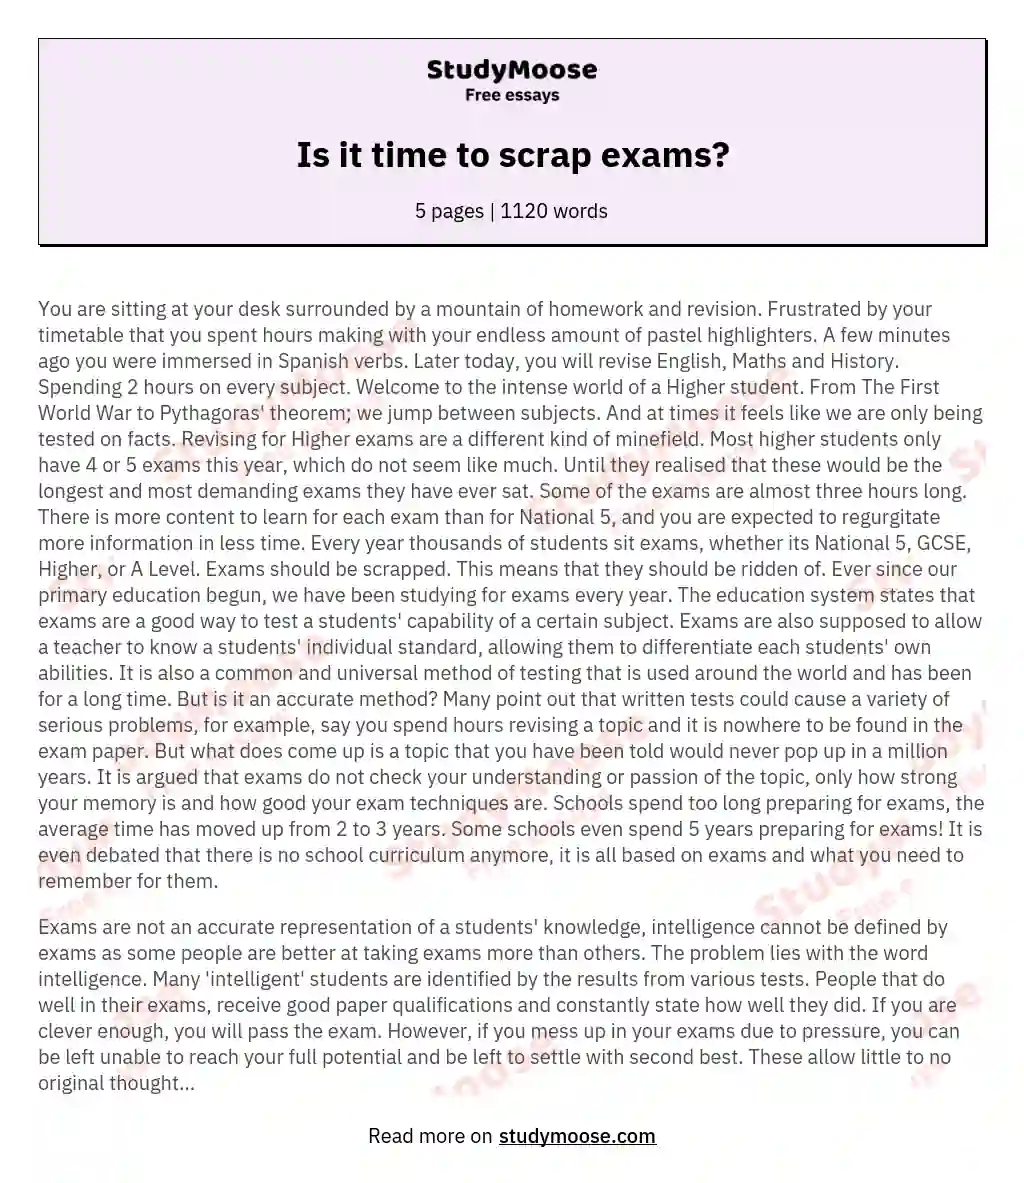 Is it time to scrap exams? essay